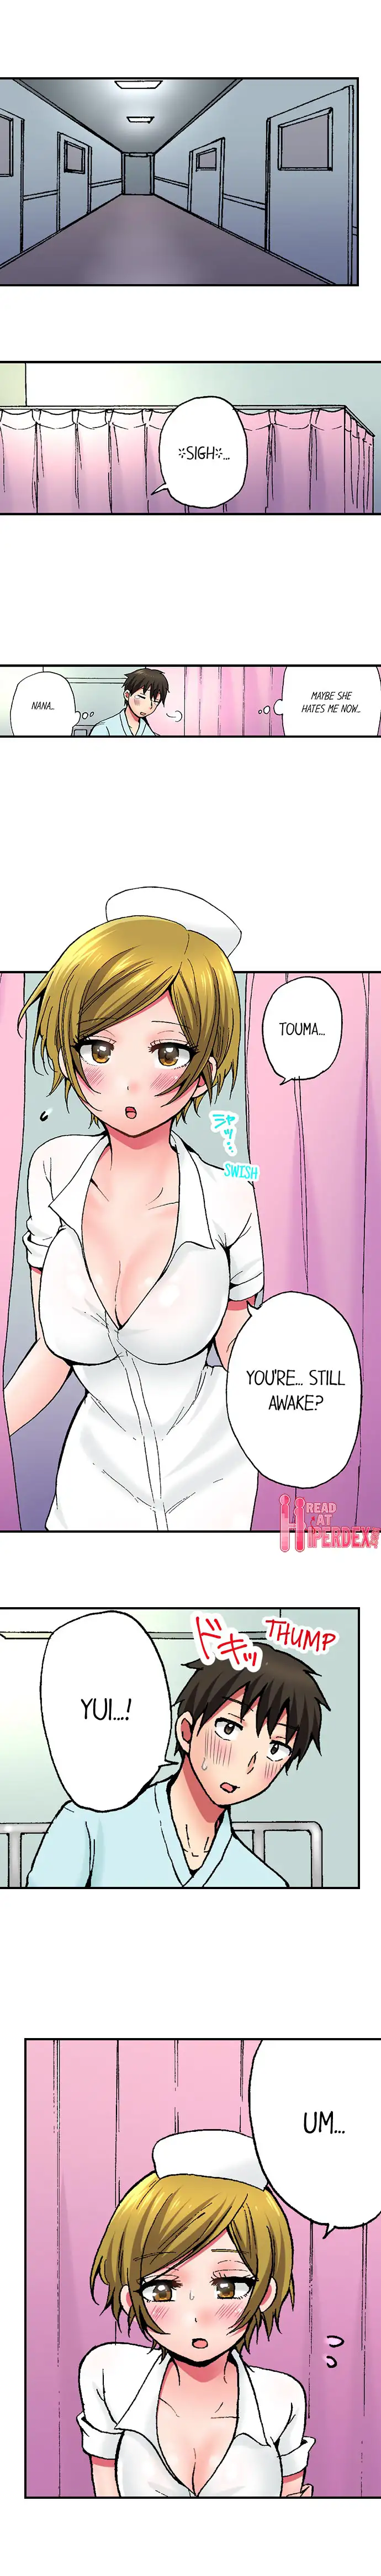 Pranking the Working Nurse - Chapter 5 Page 2